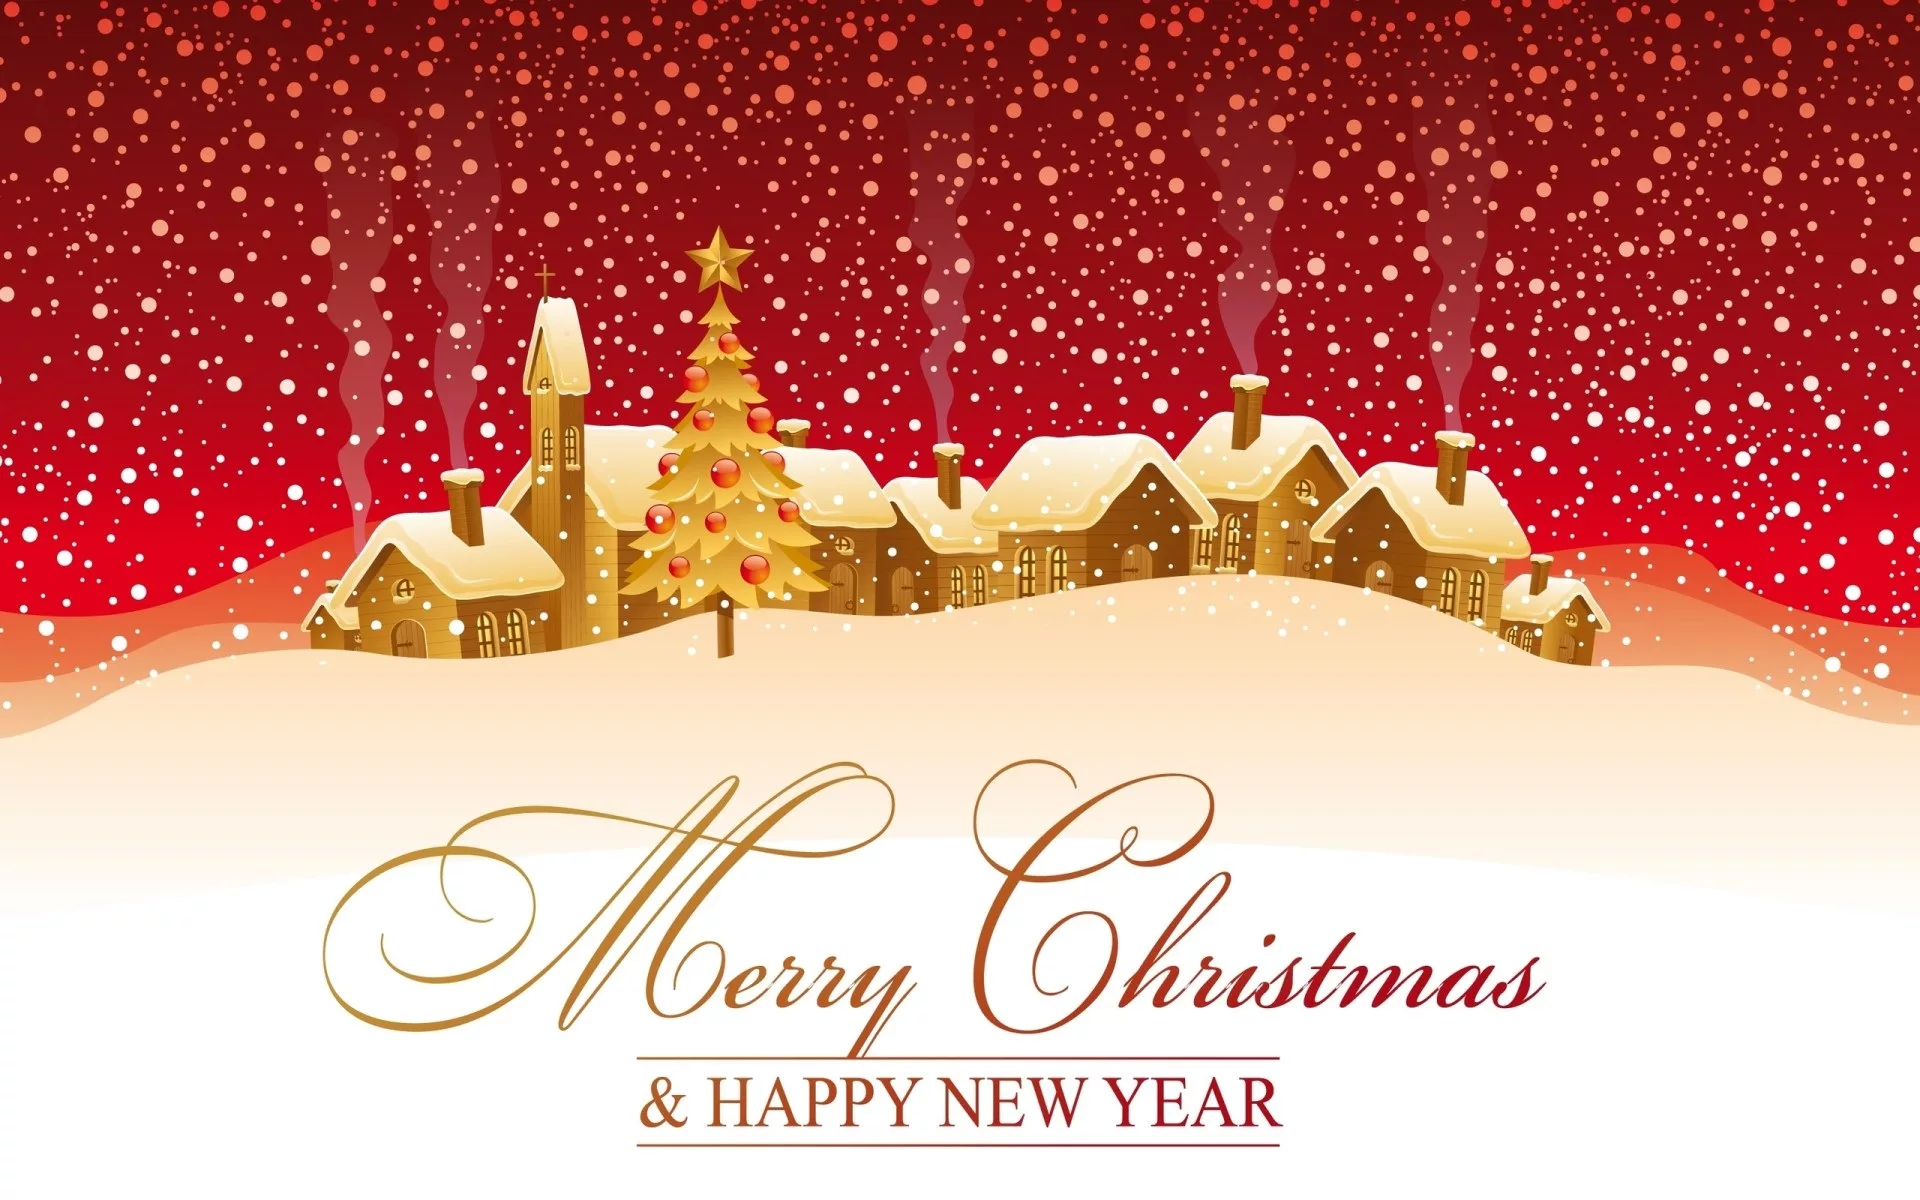 Merry Christmas and Happy New Year - Premier Roof Systems